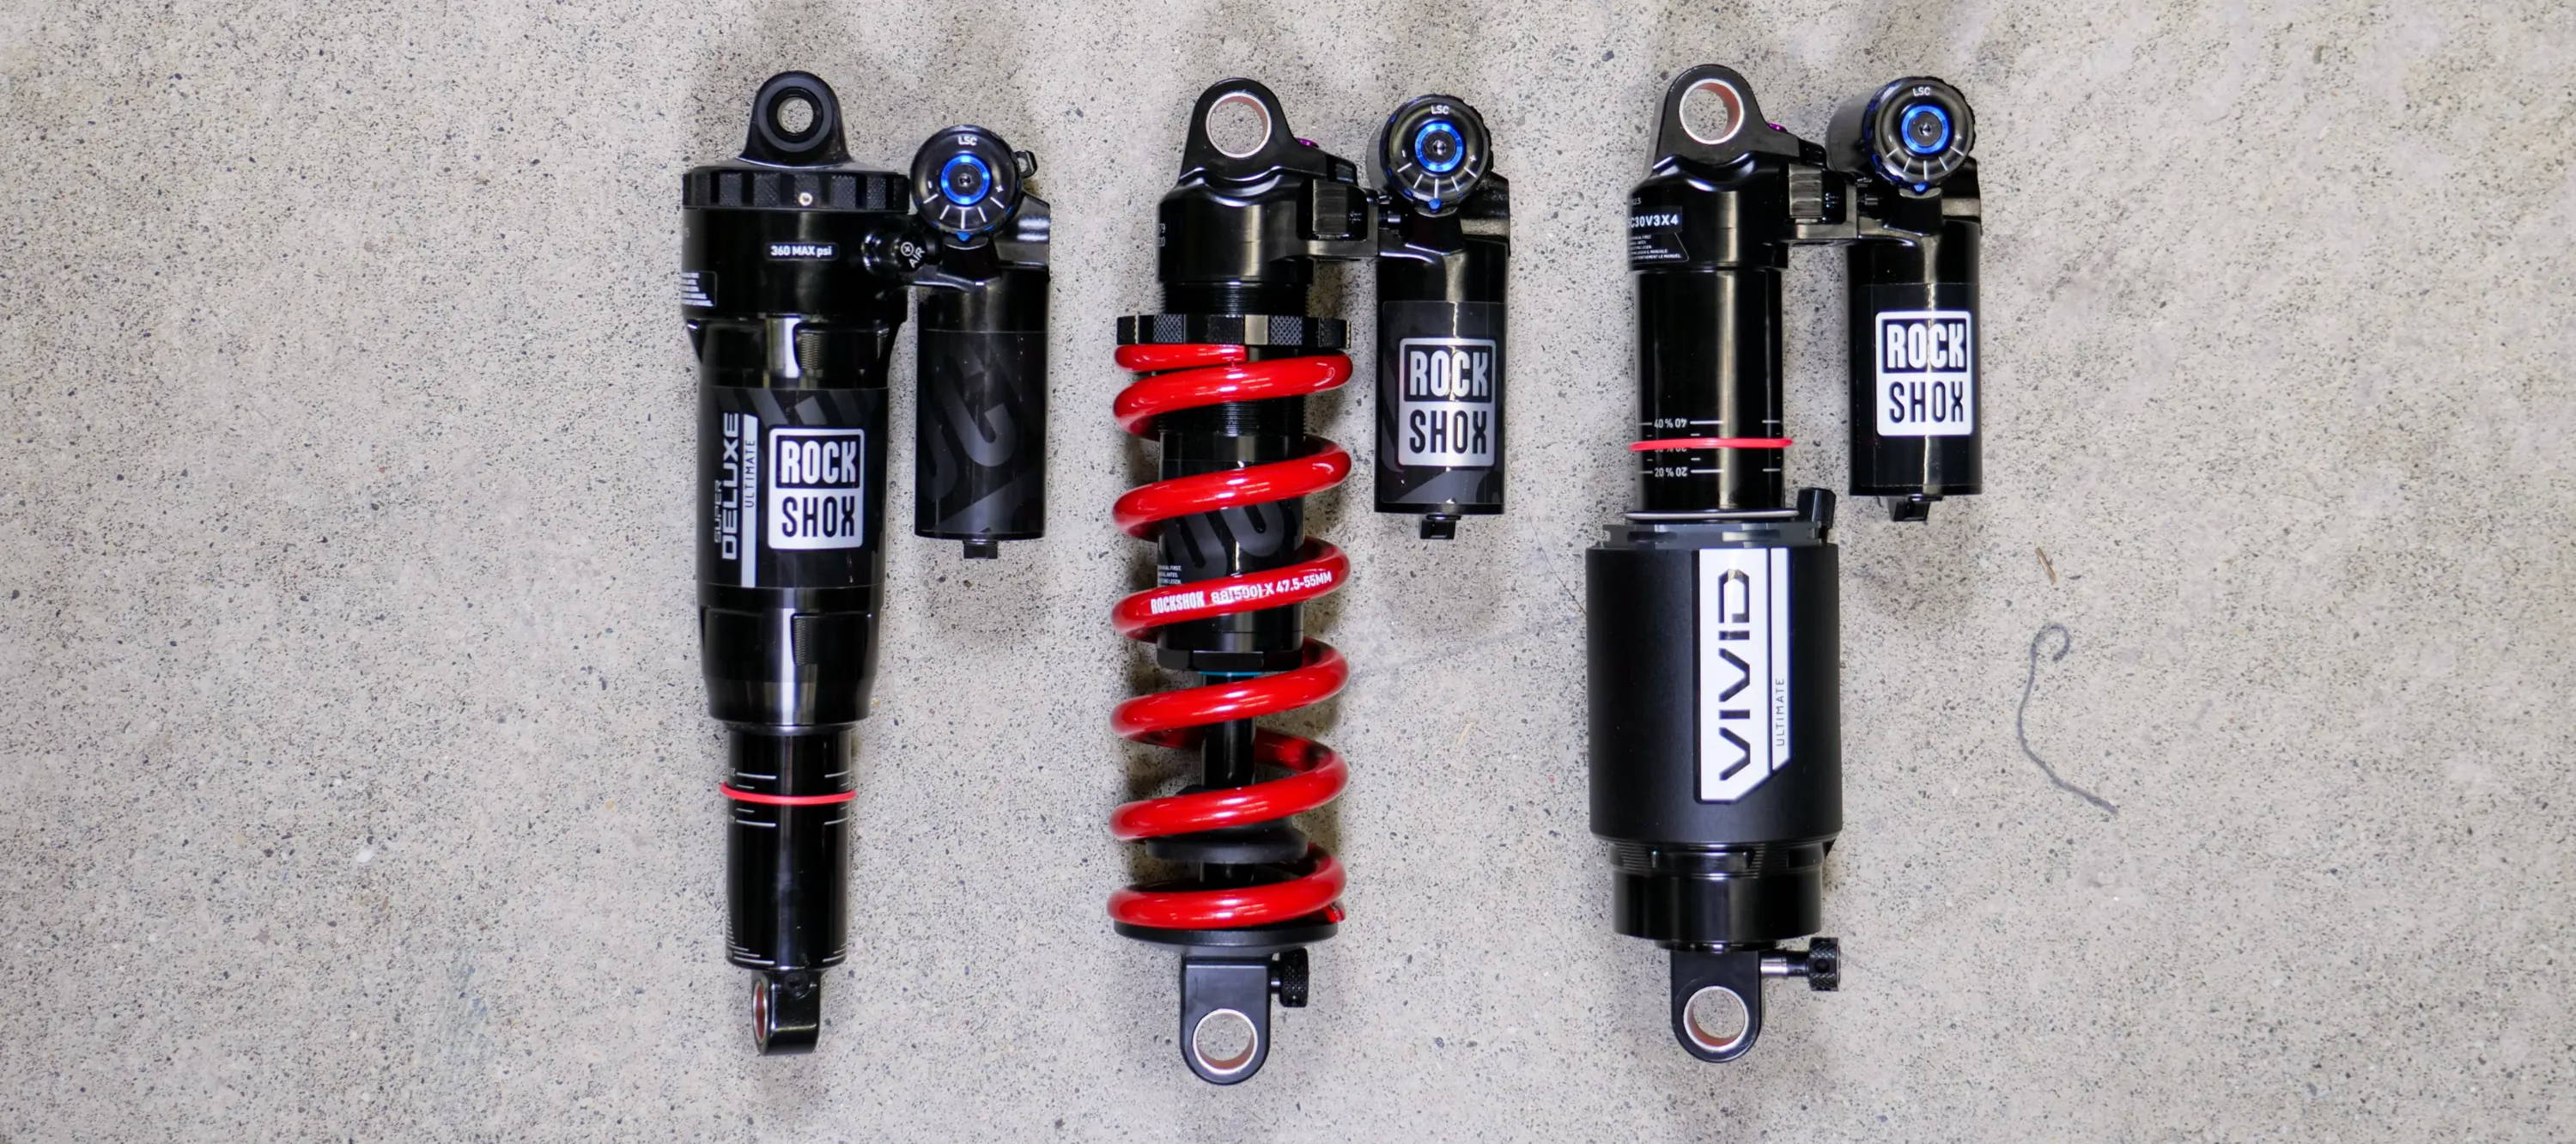 rockshox super deluxe ultimate and super deluxe coil ultimate and vivid rear mountain bike shocks laying on concrete to be compared